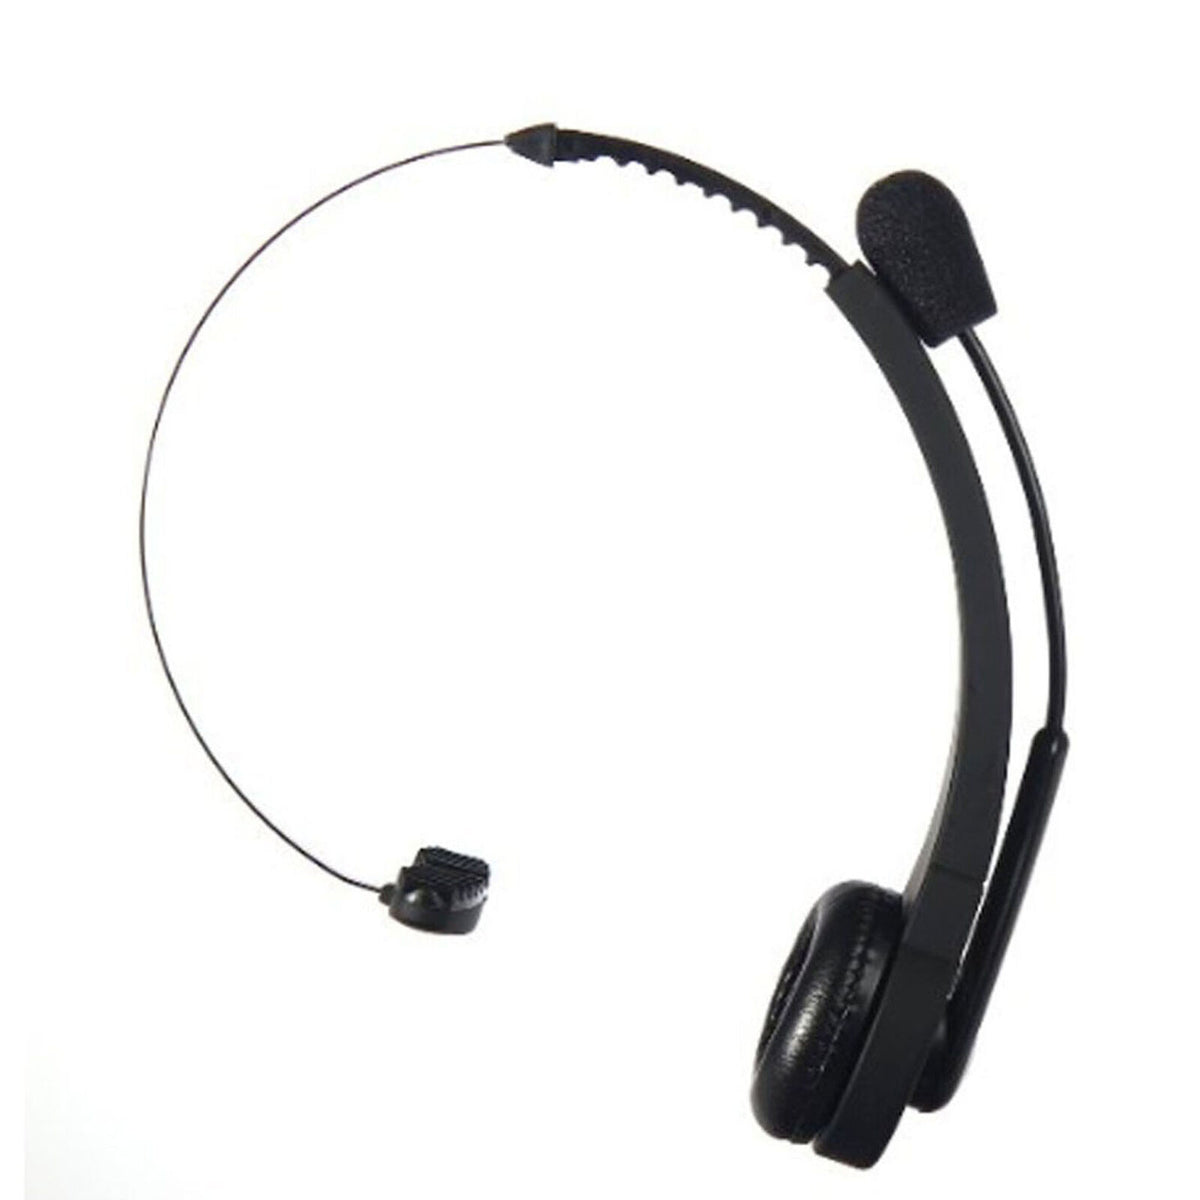 Headsets for PlayStation, PC/Mac Android, Wii